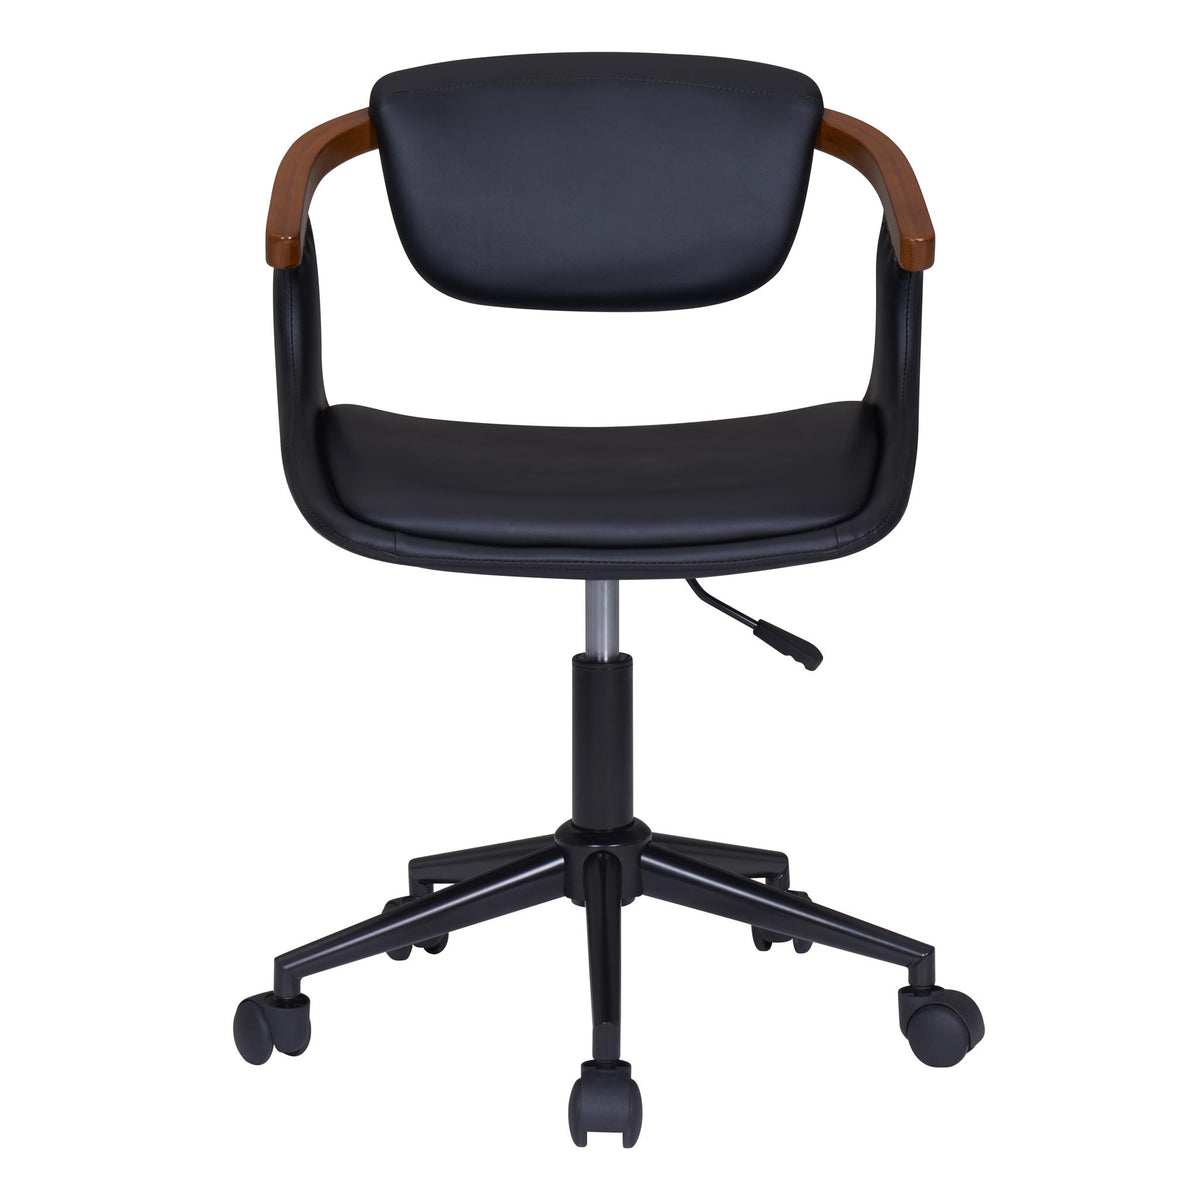 Darwin PU Bamboo Office Chair by New Pacific Direct - 1160015